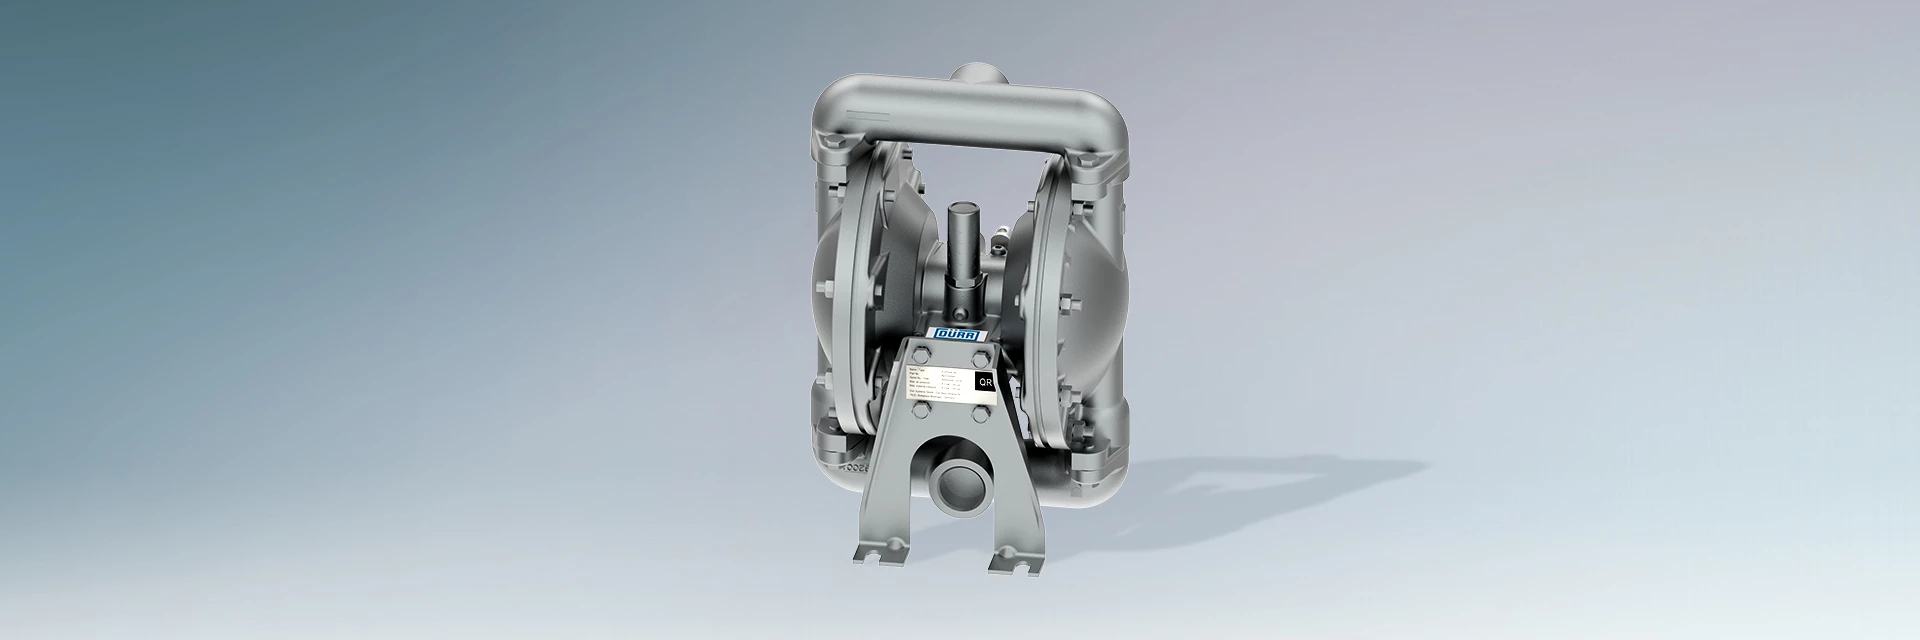 Air operated diaphragm pumps are the best solution for different kind of fluid handling such as abrasive and particle containing fluids.